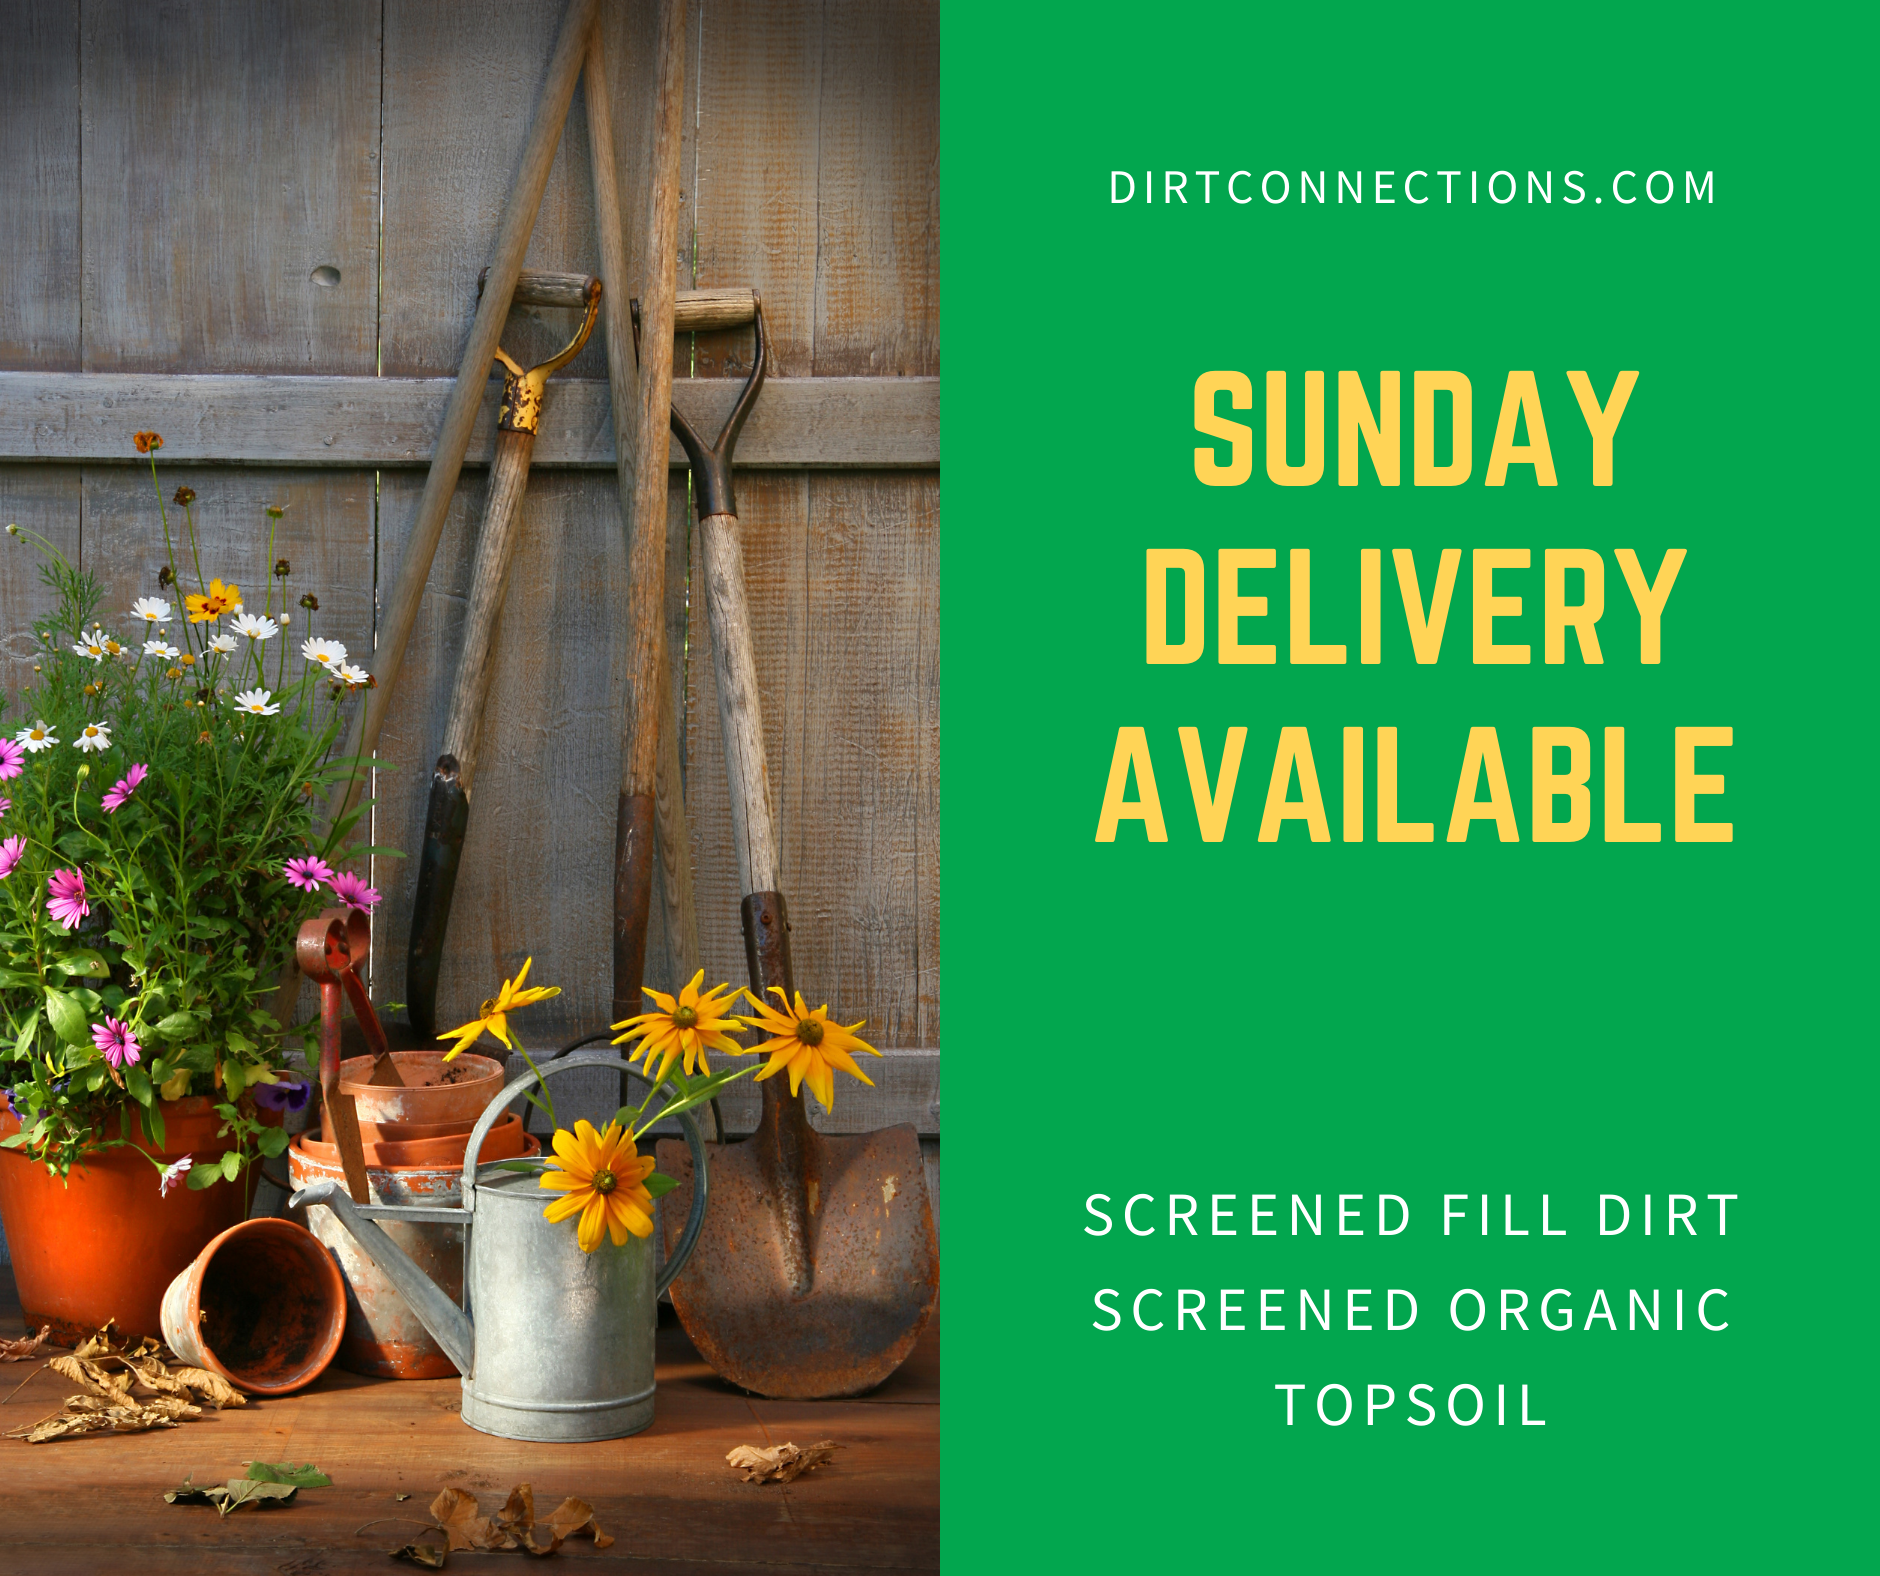 Sunday deliveries available now